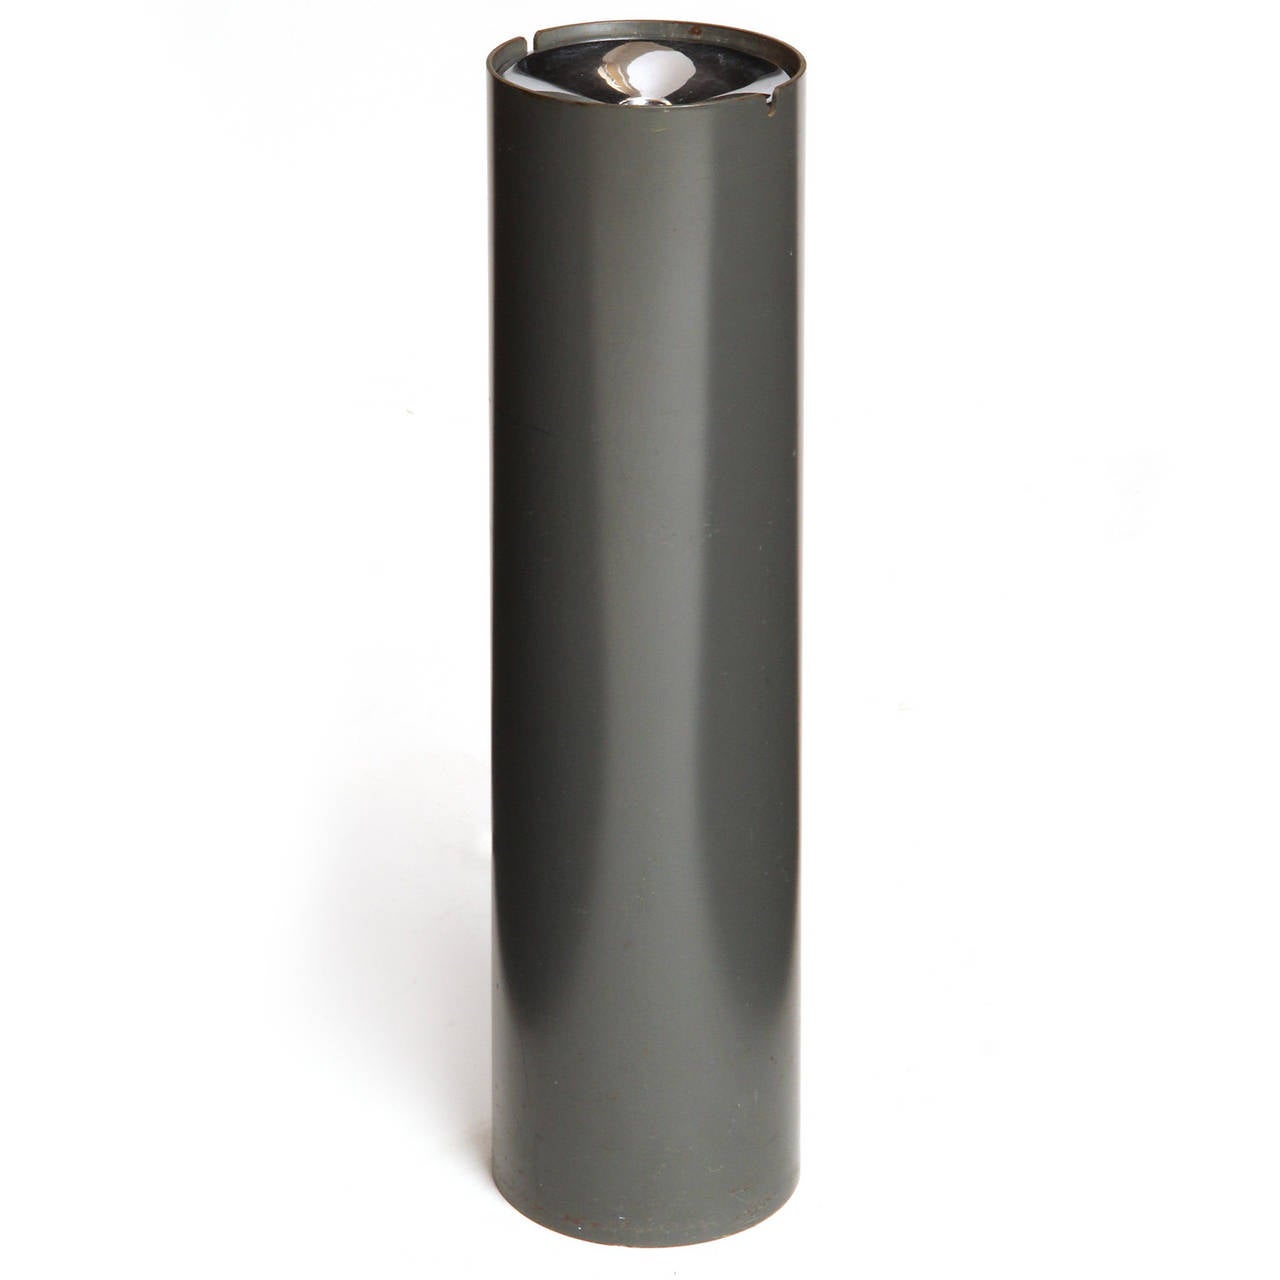 A tall, Minimalist standing floor ashtray having a weighted cylindrical black lacquered steel body with a chromed removable top.